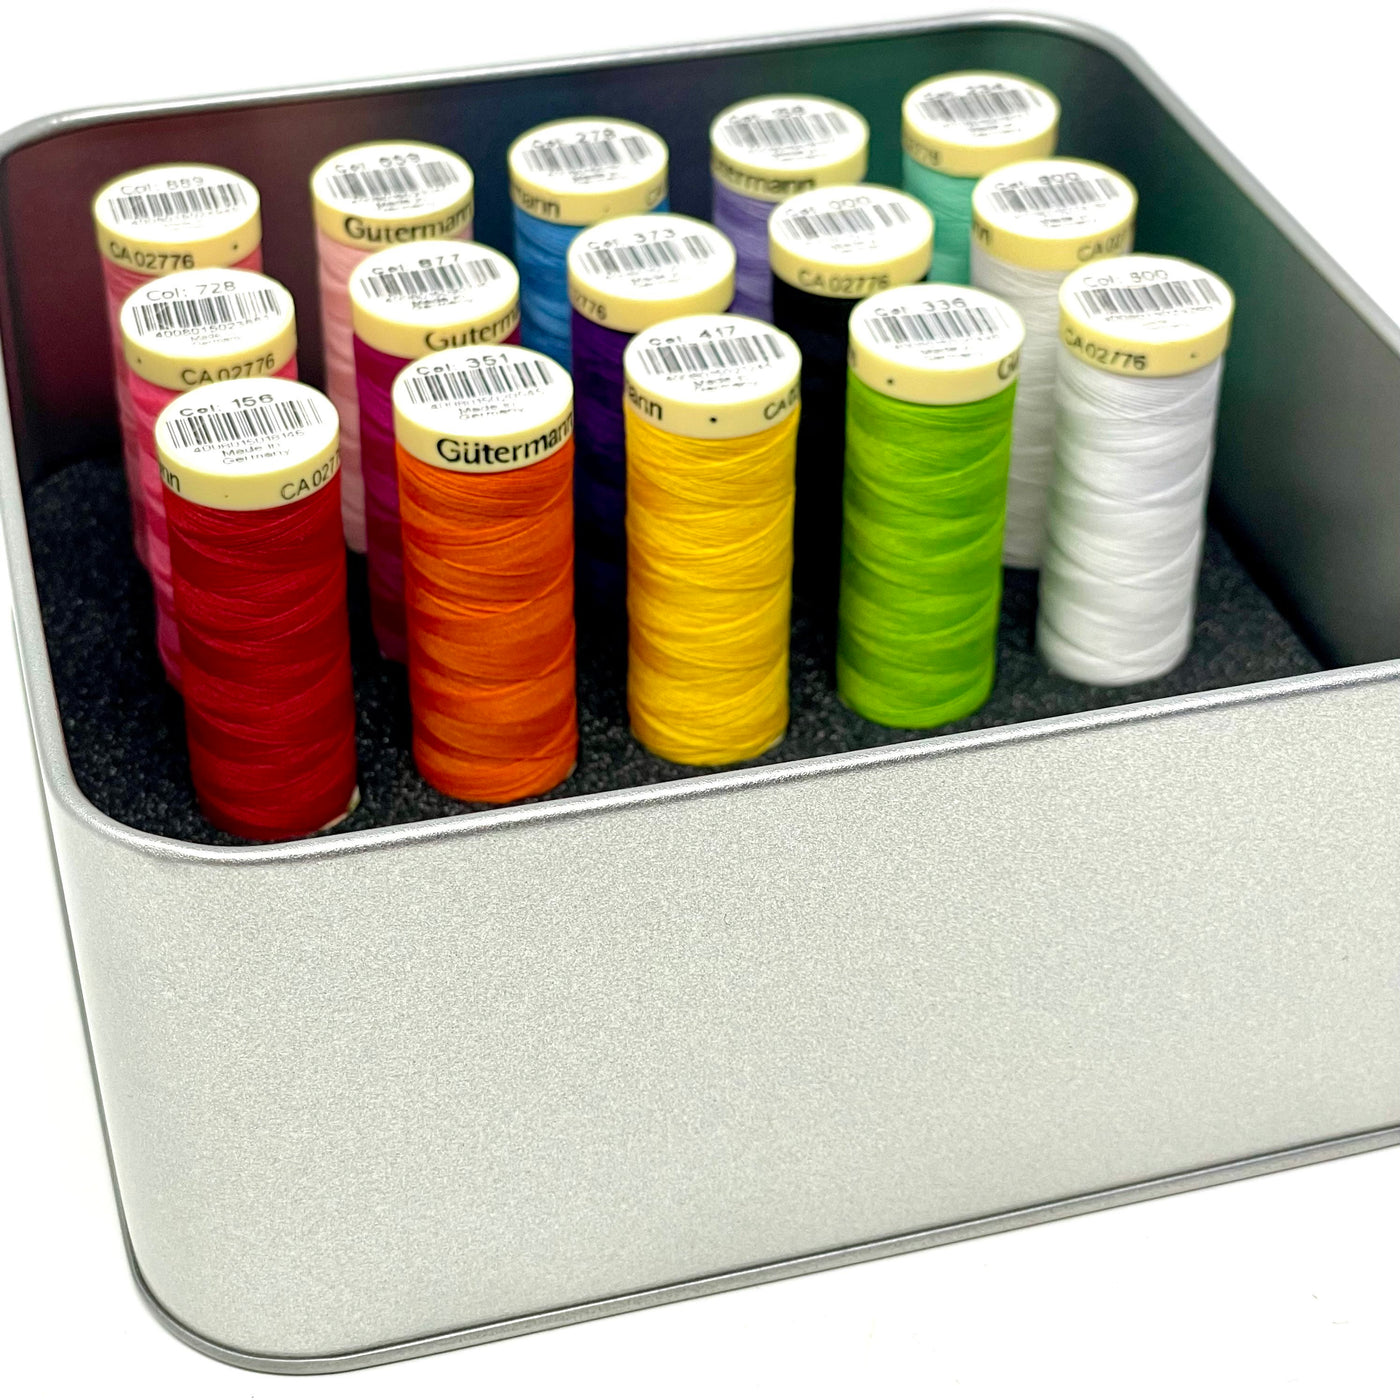 Gutermann storage tin with foam insert to hold 25 spools (not included)